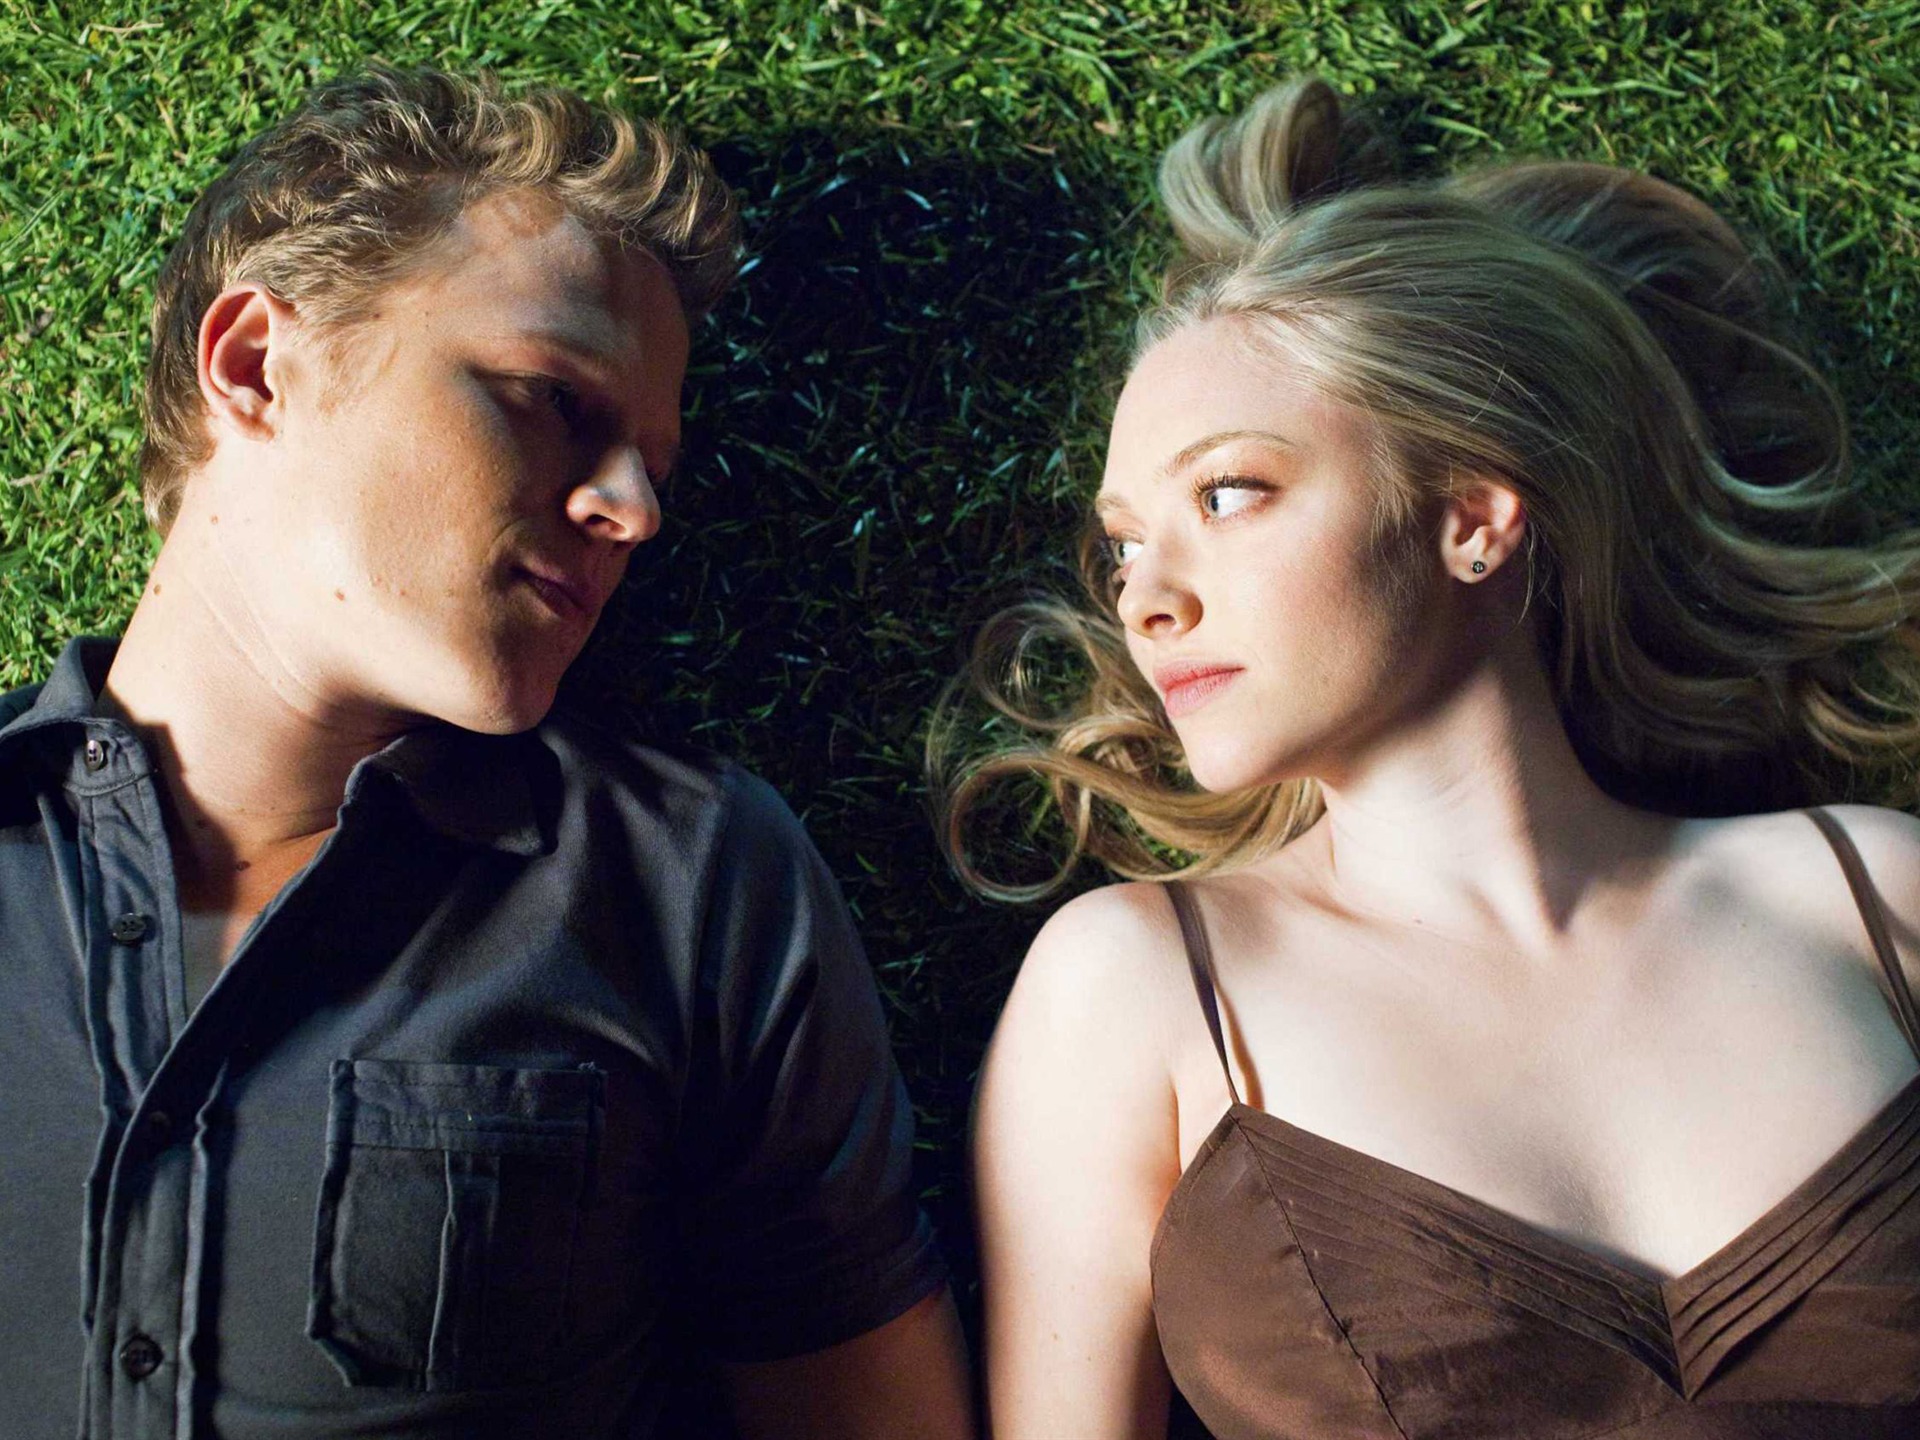 Letters to Juliet 给朱丽叶的信 高清壁纸6 - 1920x1440